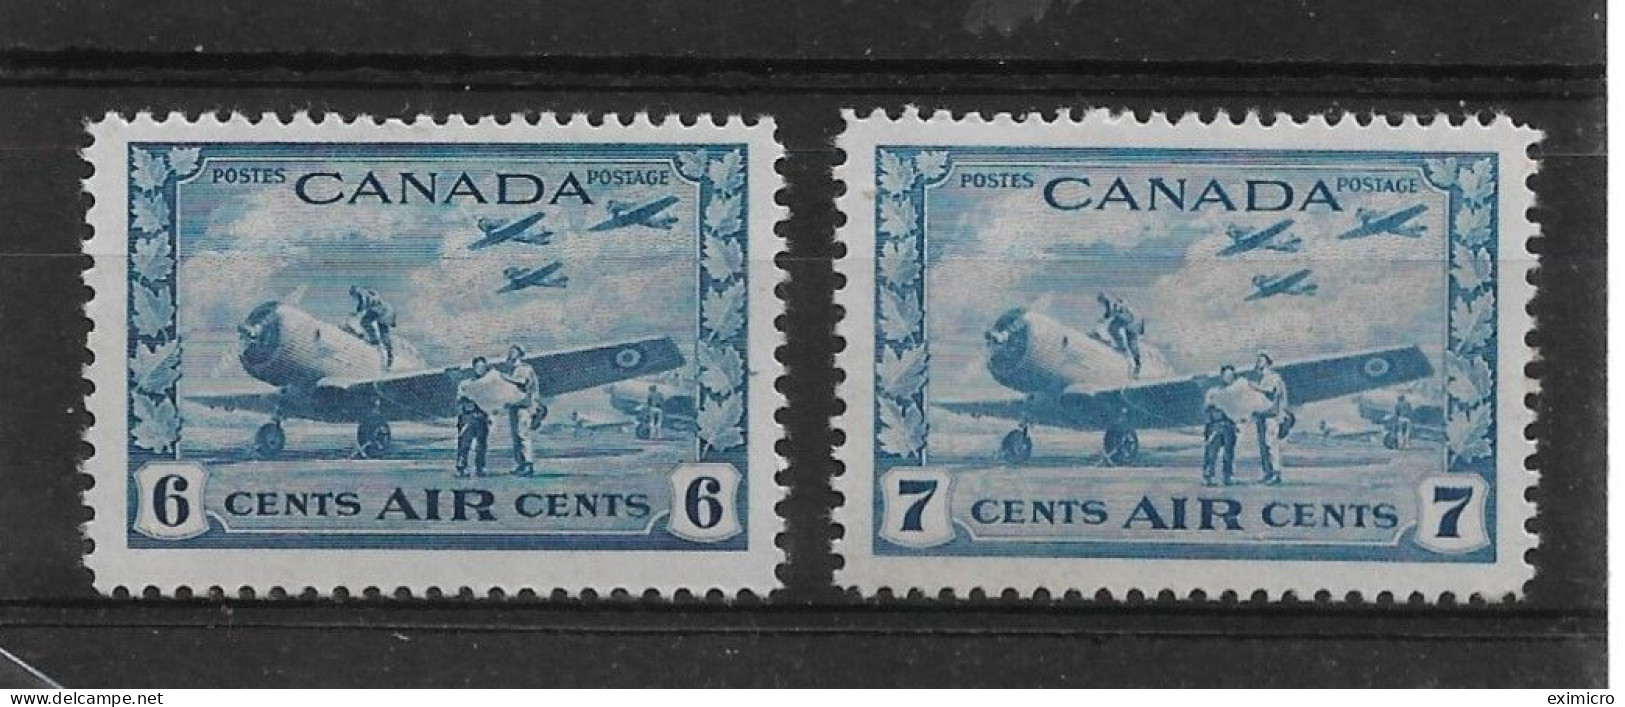 CANADA 1942 - 1943 AIR STAMPS 6c, 7c SG 399/400 UNMOUNTED MINT Cat £37+ - Luchtpost